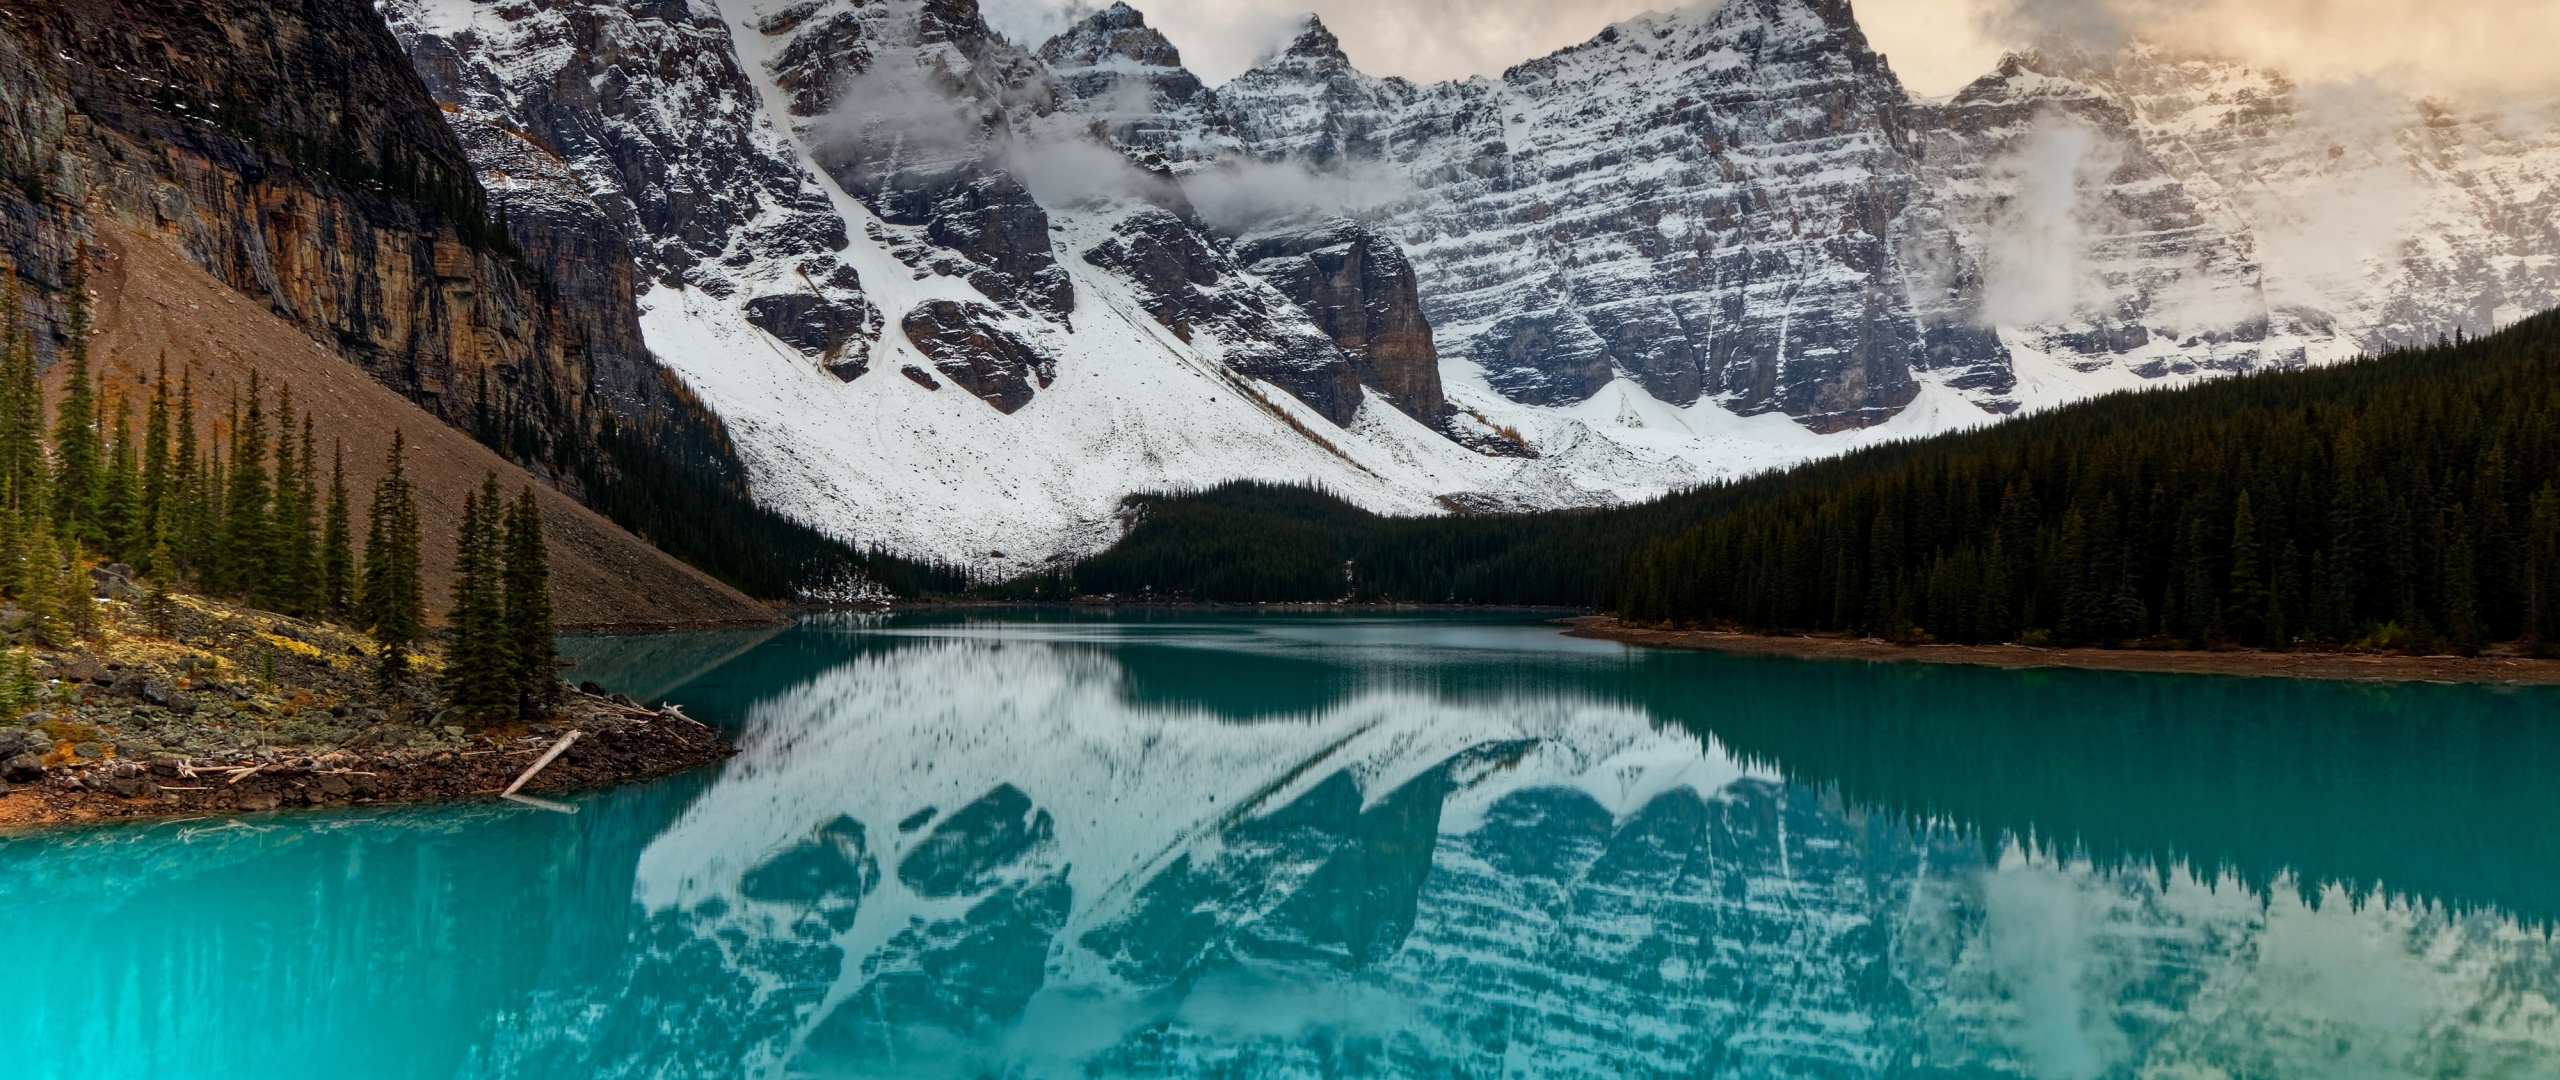 Banff National Park 4K Wallpapers  HD Wallpapers  ID 22798